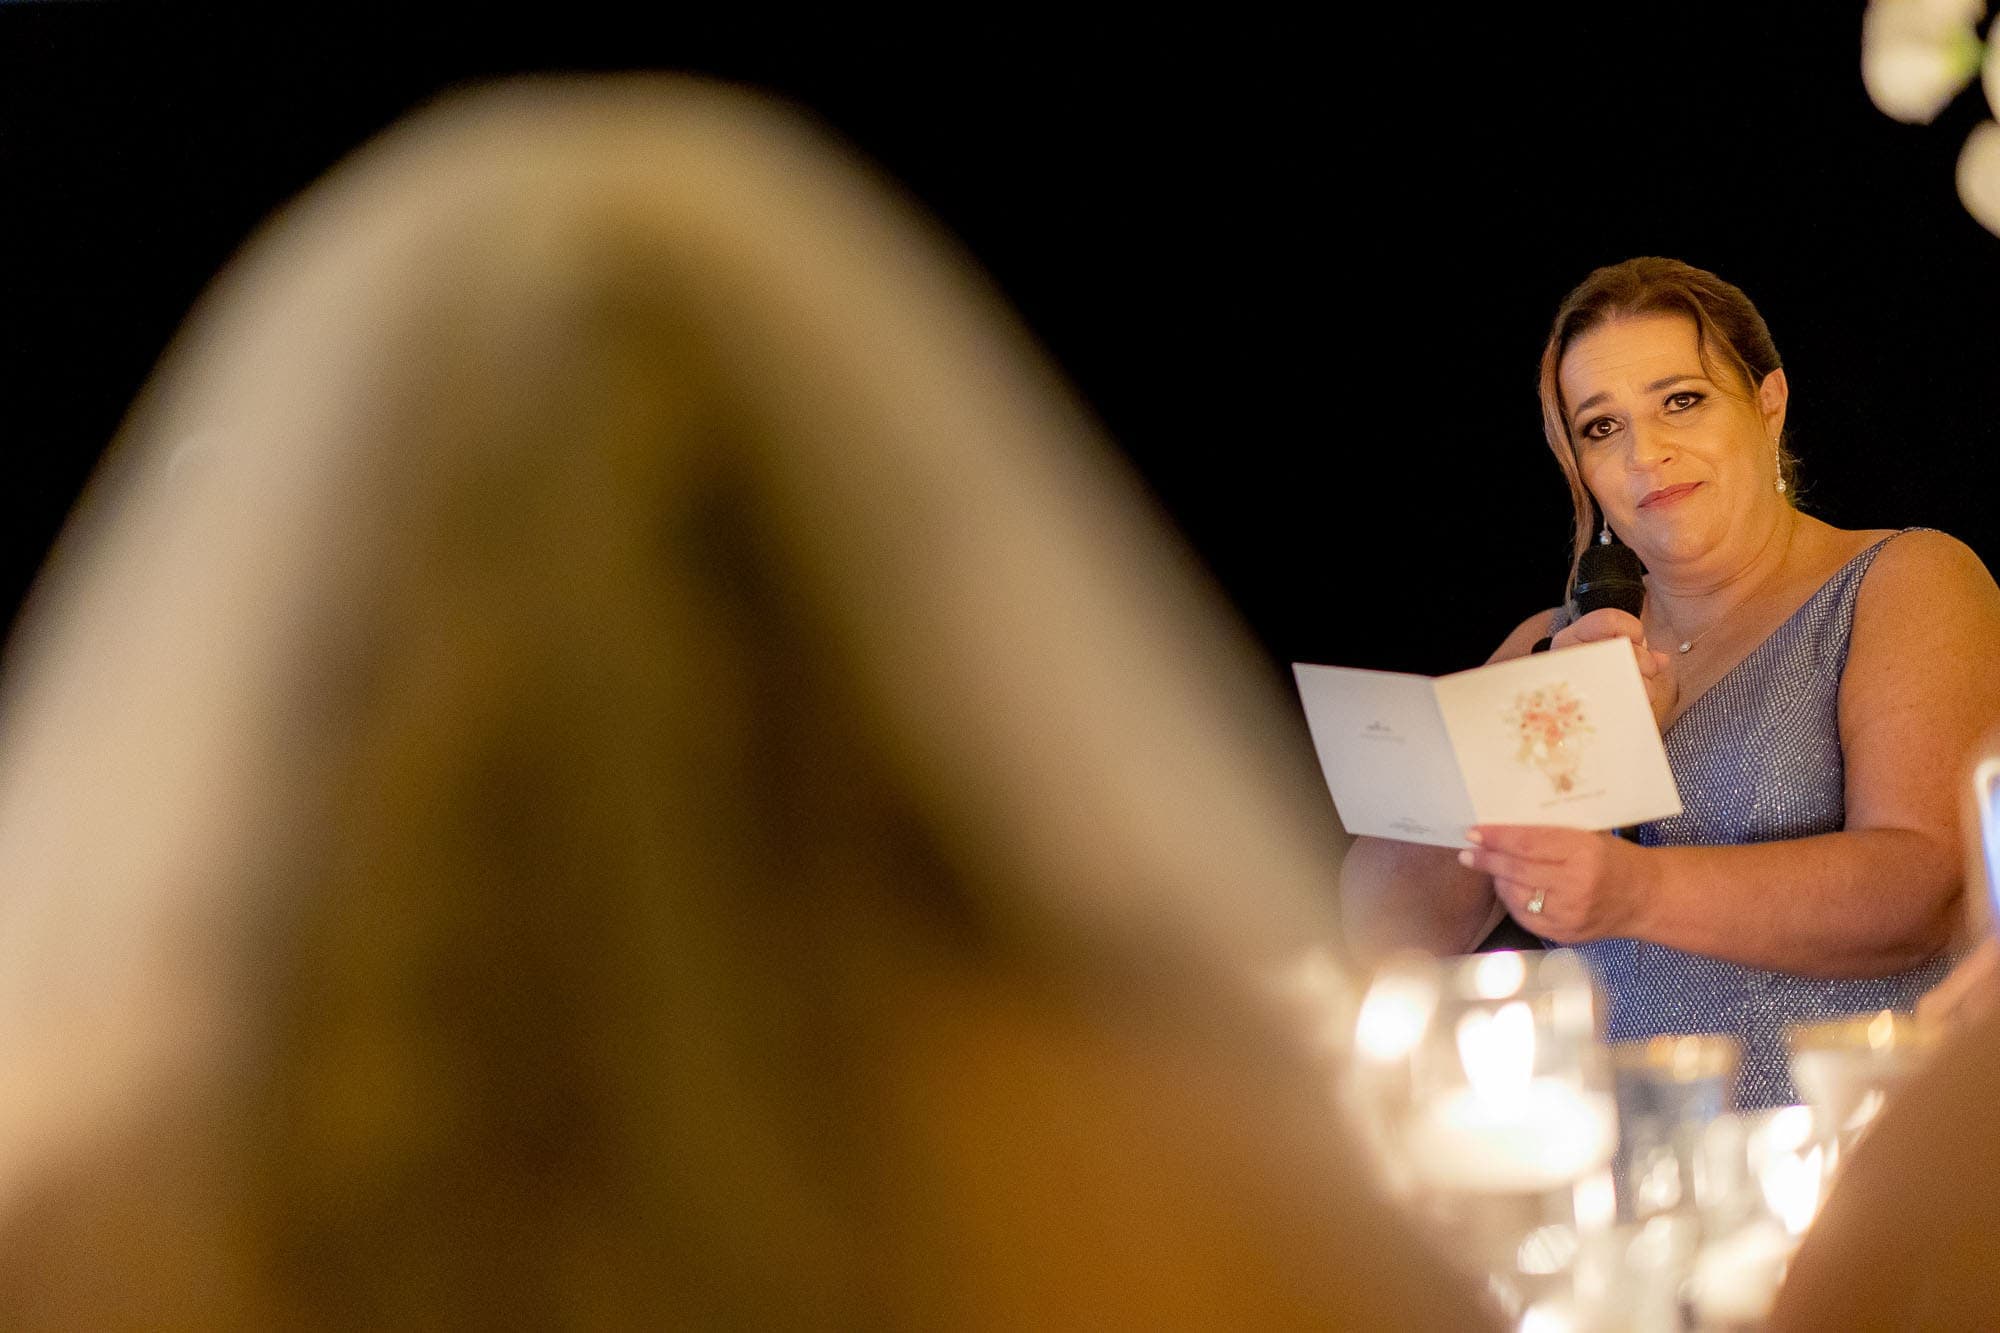 Guest reads a special message for the bride and groom